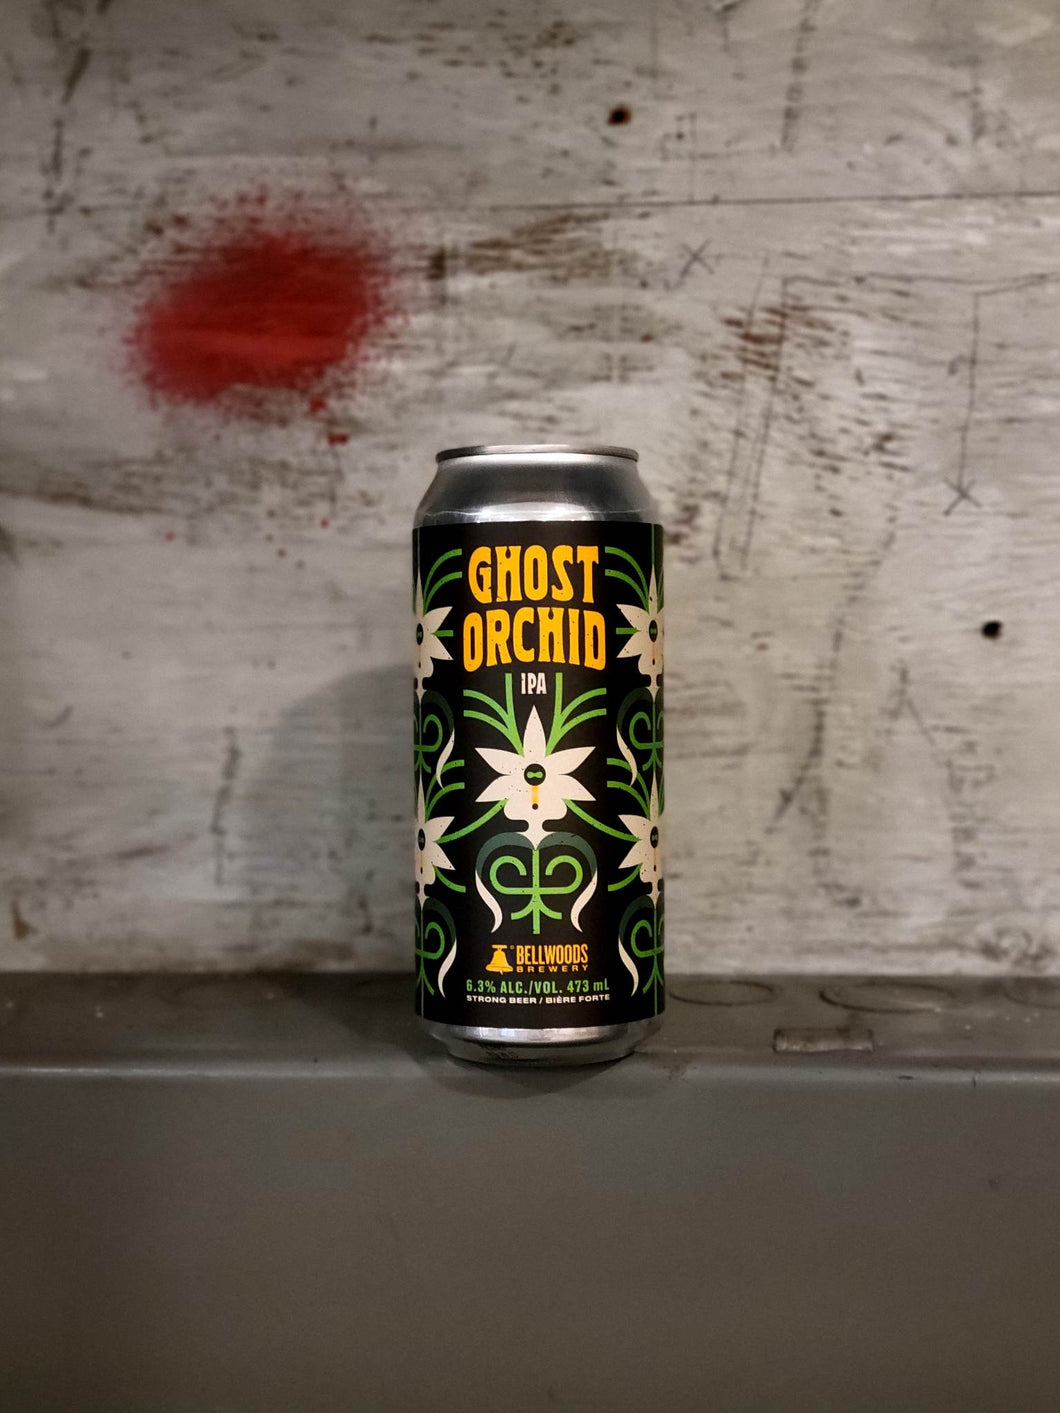 Bellwoods Ghost Orchid IPA